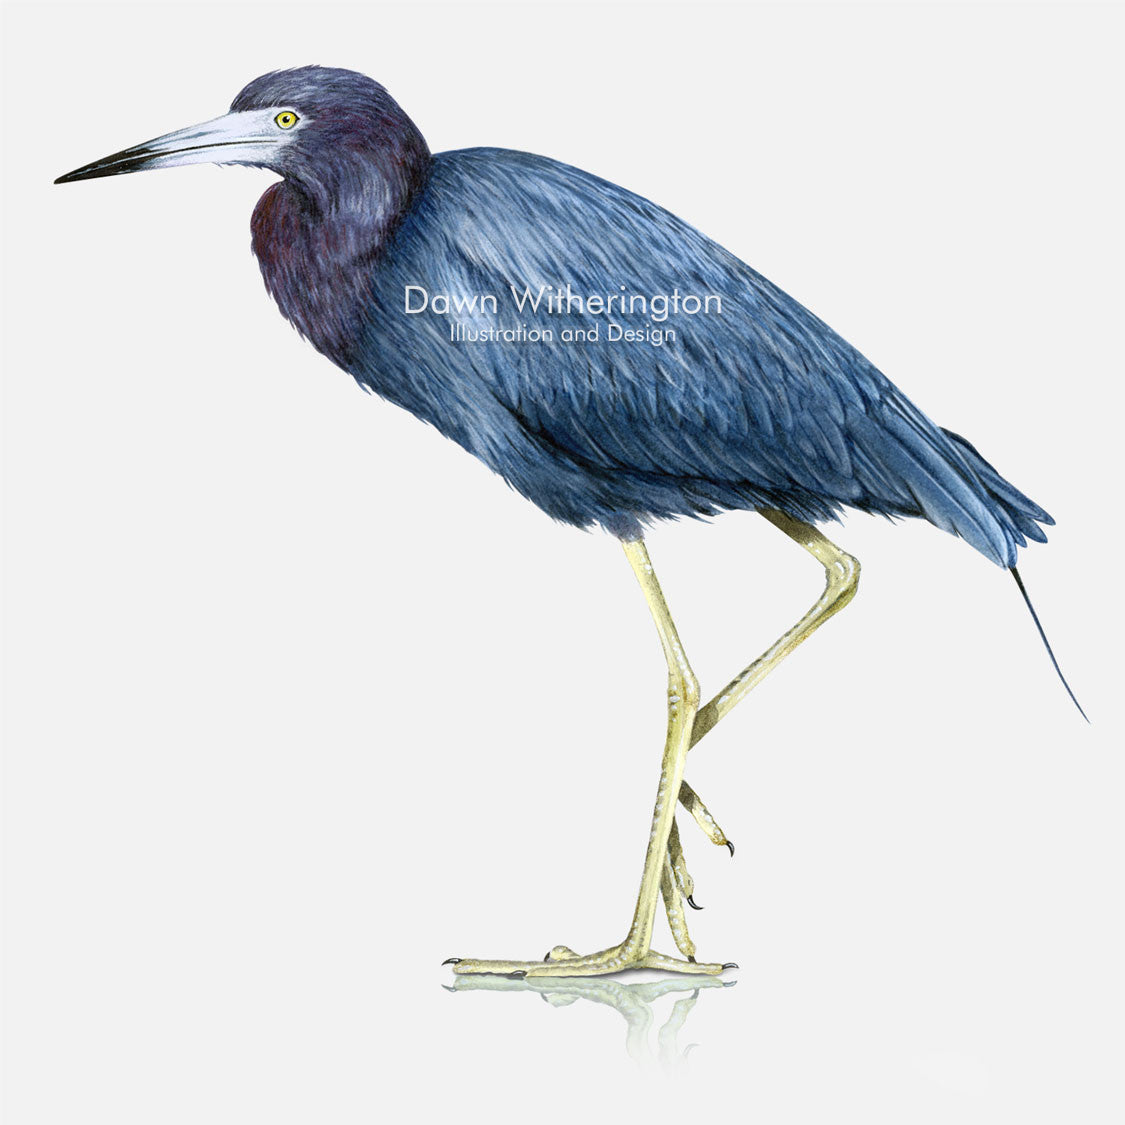 This beautiful illustration of a little blue heron, Egretta caerulea, is biologically accurate in detail.